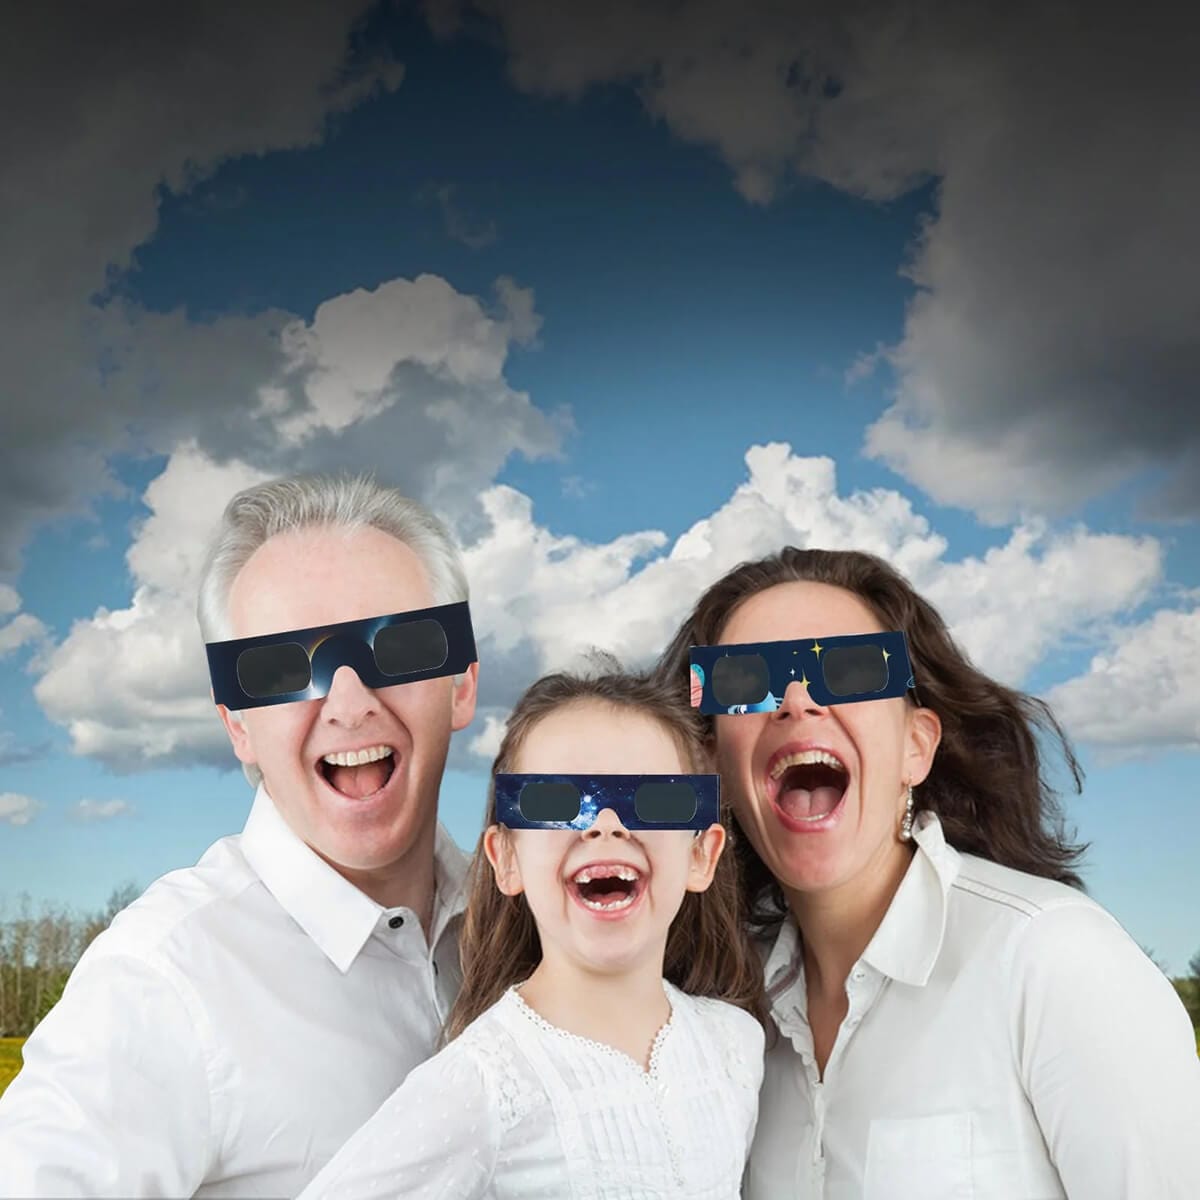 PNJ Eclipse Glasses ISO Certified Solar Eclipse Glasses - Eclipse